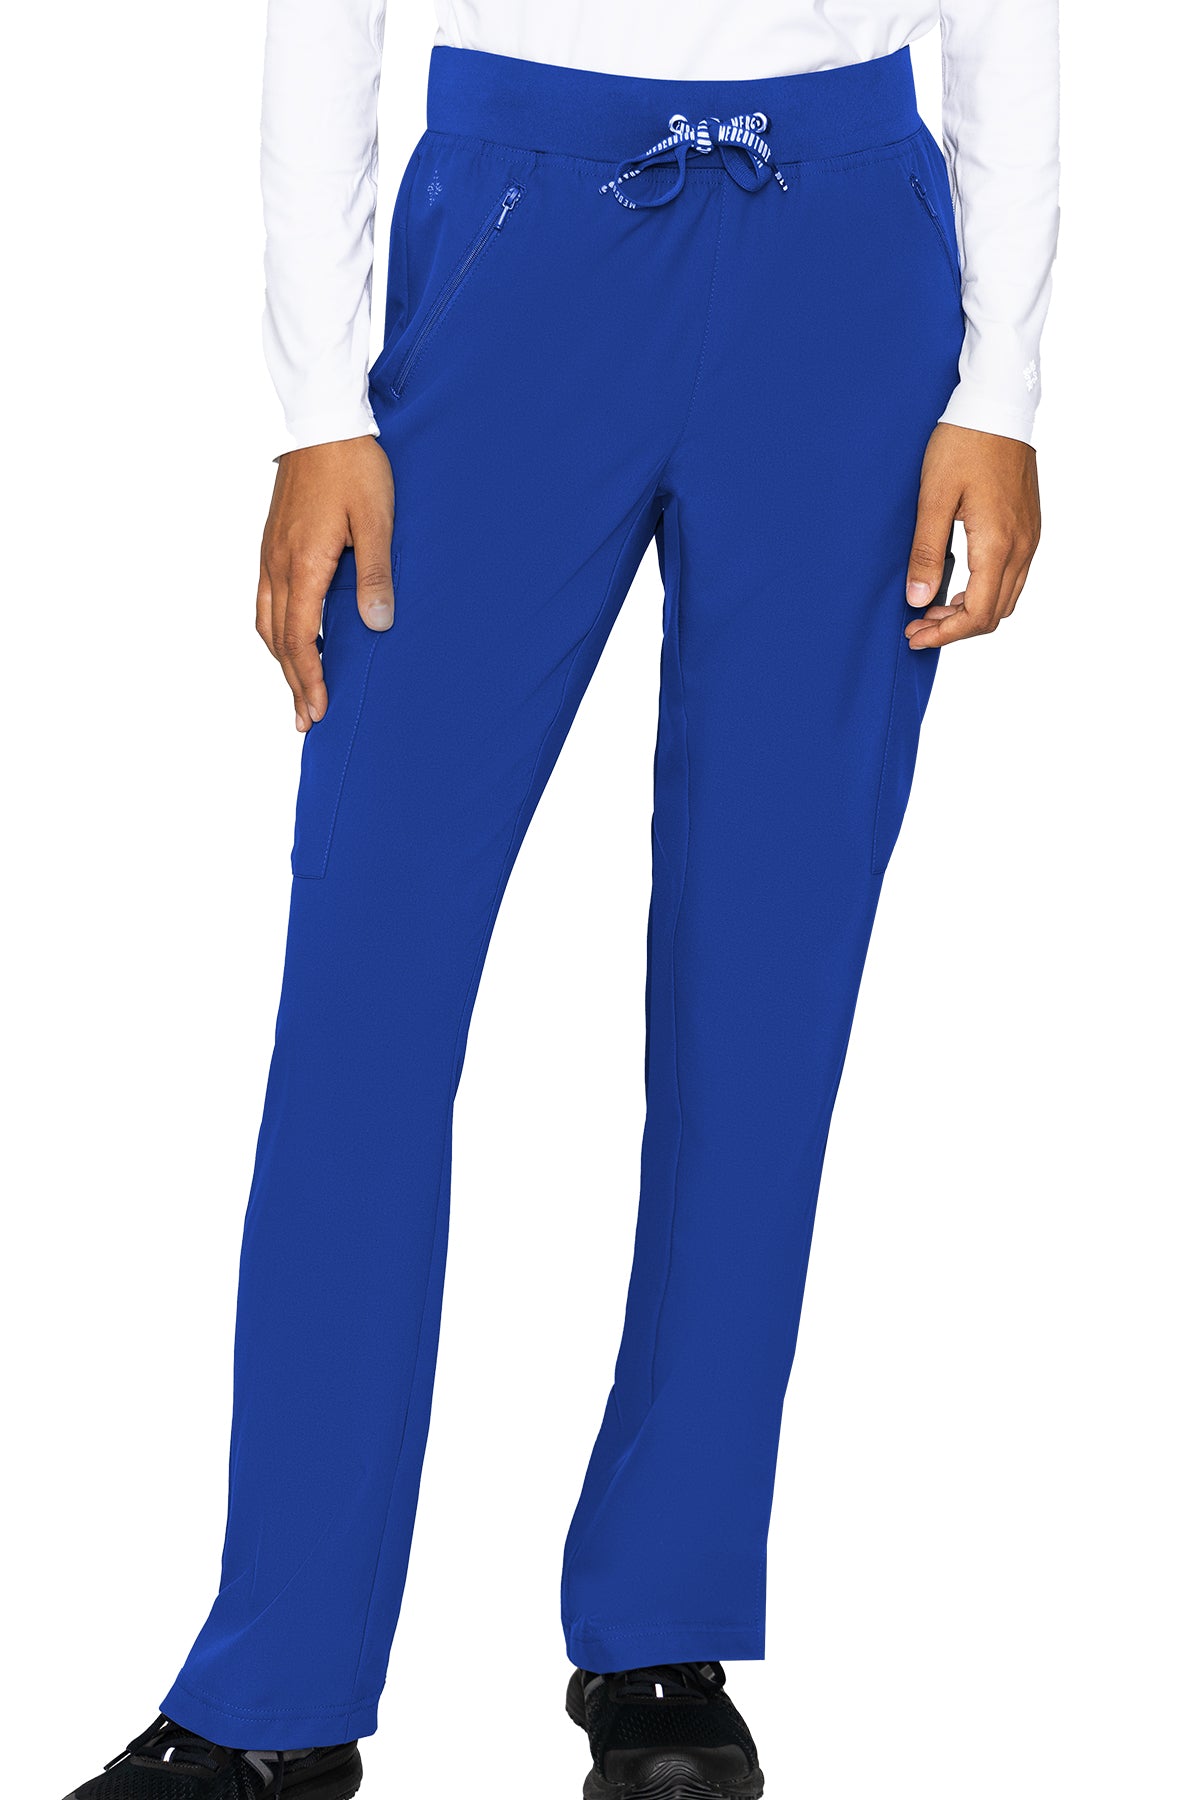 Med Couture Petite Scrub Pants Insight Zipper Pocket Pant in Royal at Parker's Clothing and Shoes